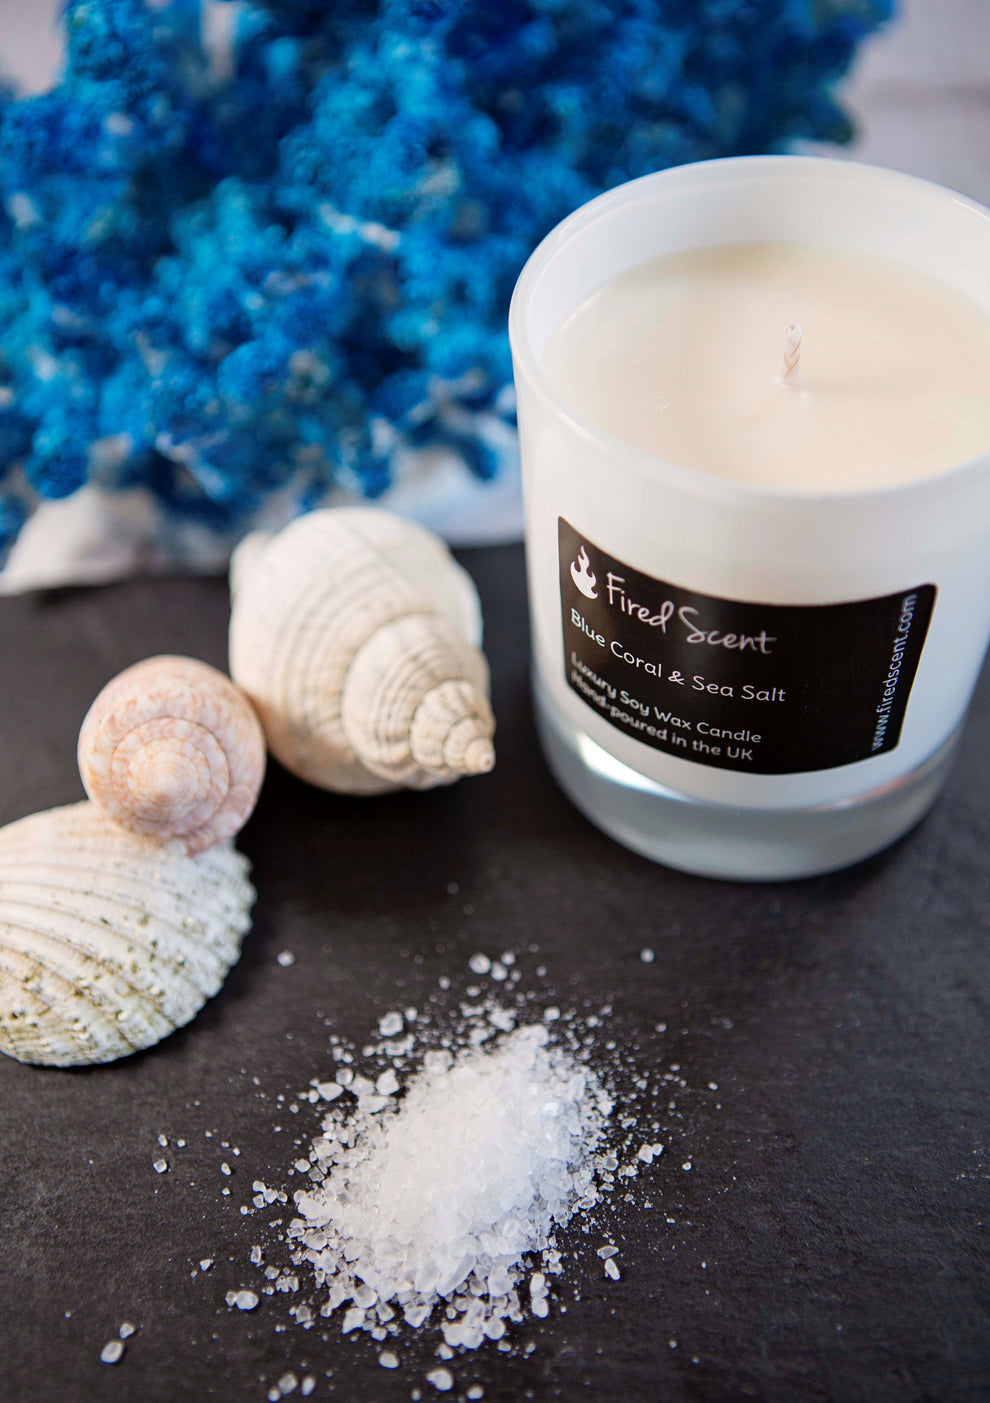 Fired Scent – Luxury Candles, Scented Wax Melts